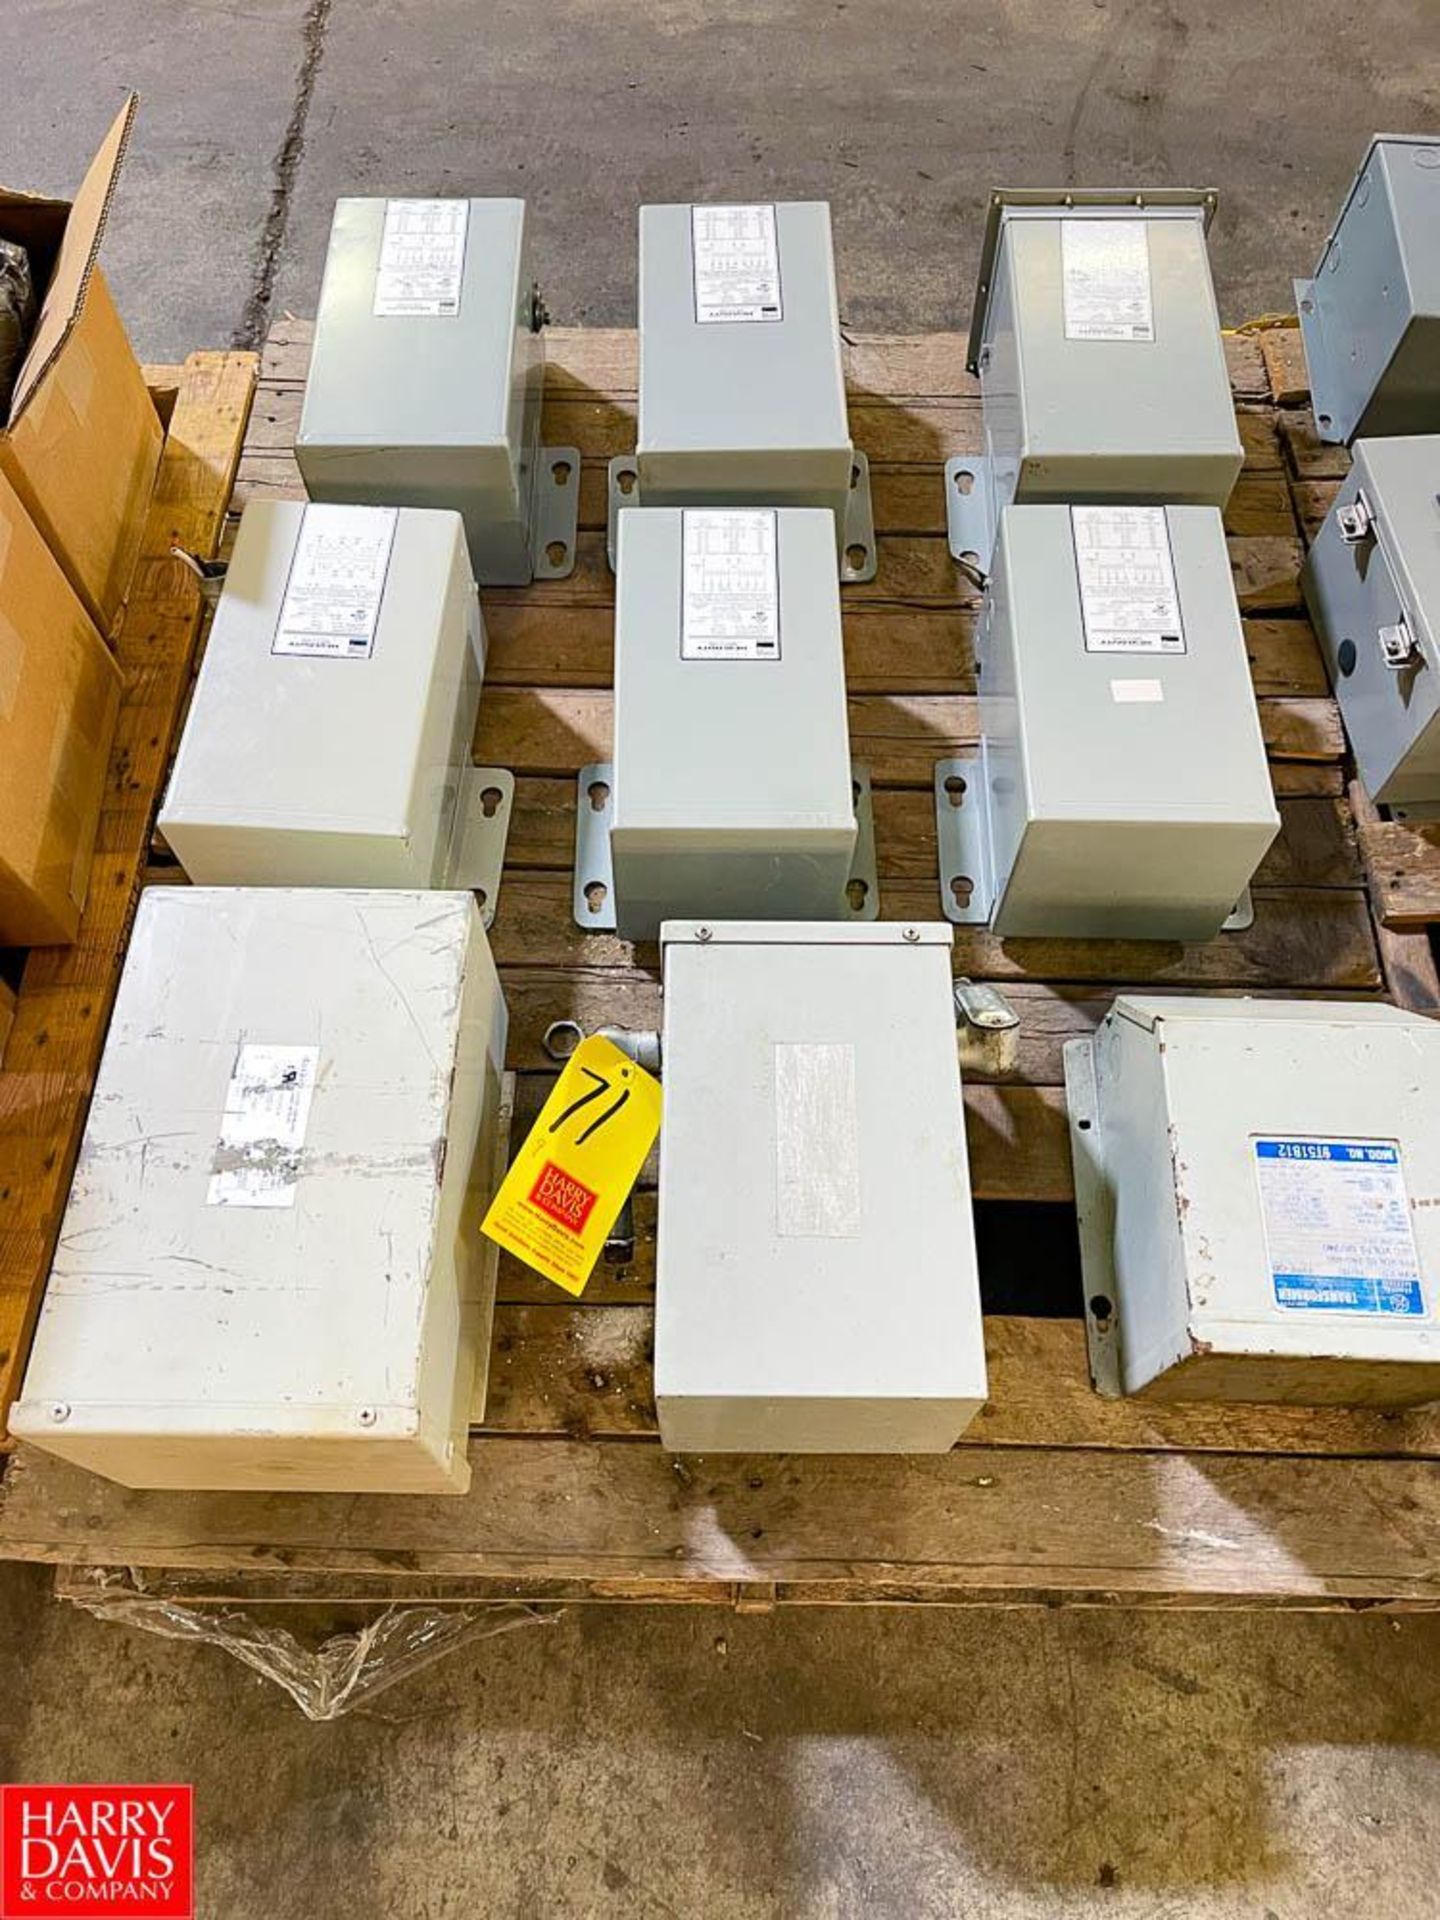 EGS Hevi Duty 3kVA and 2 kVA, GE and other Transformer